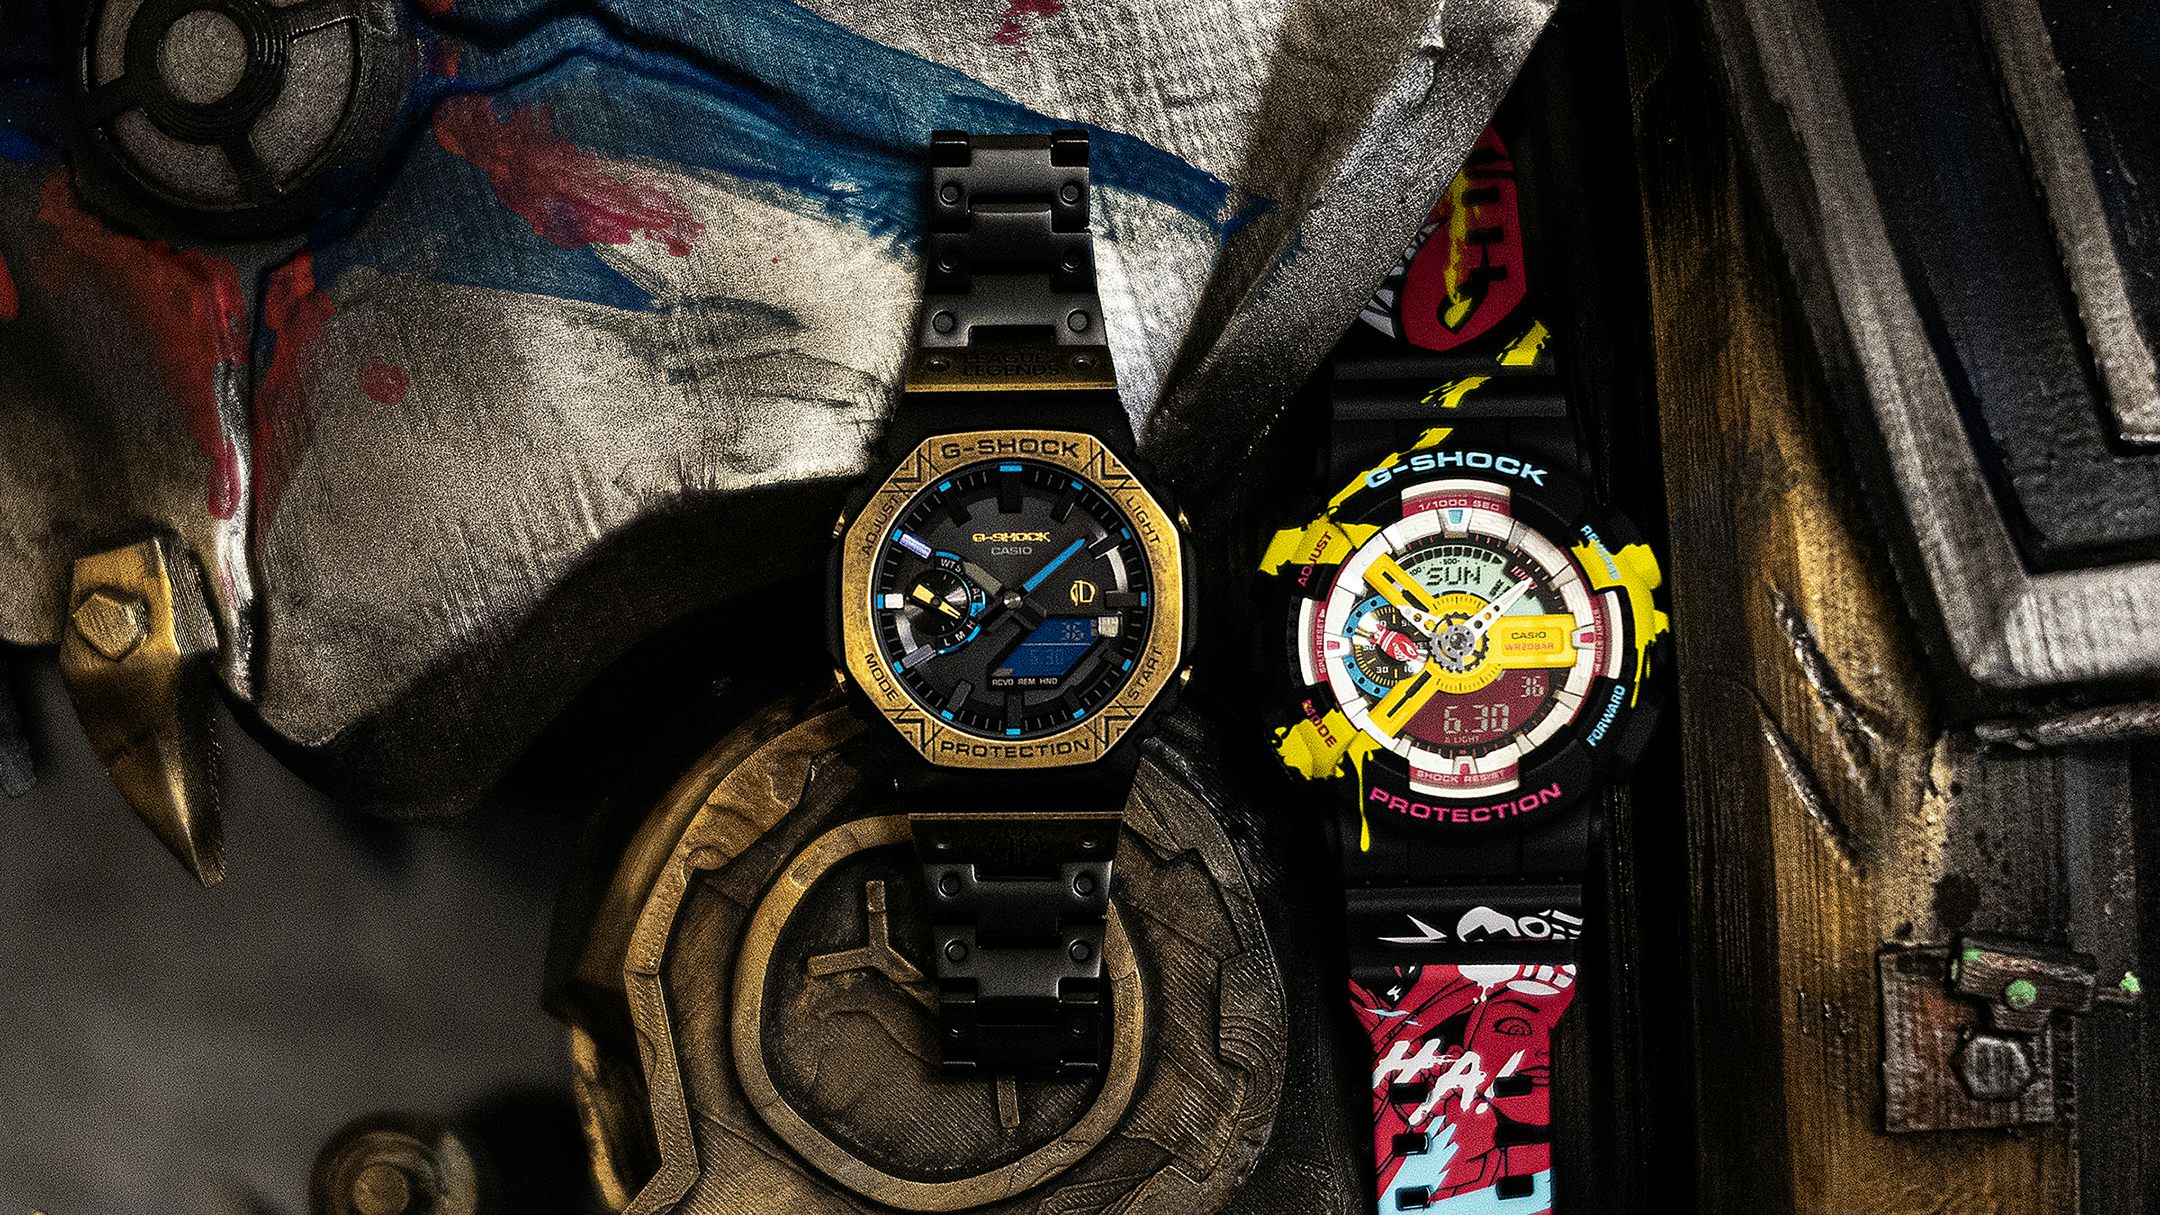 Two G-Shock watches.